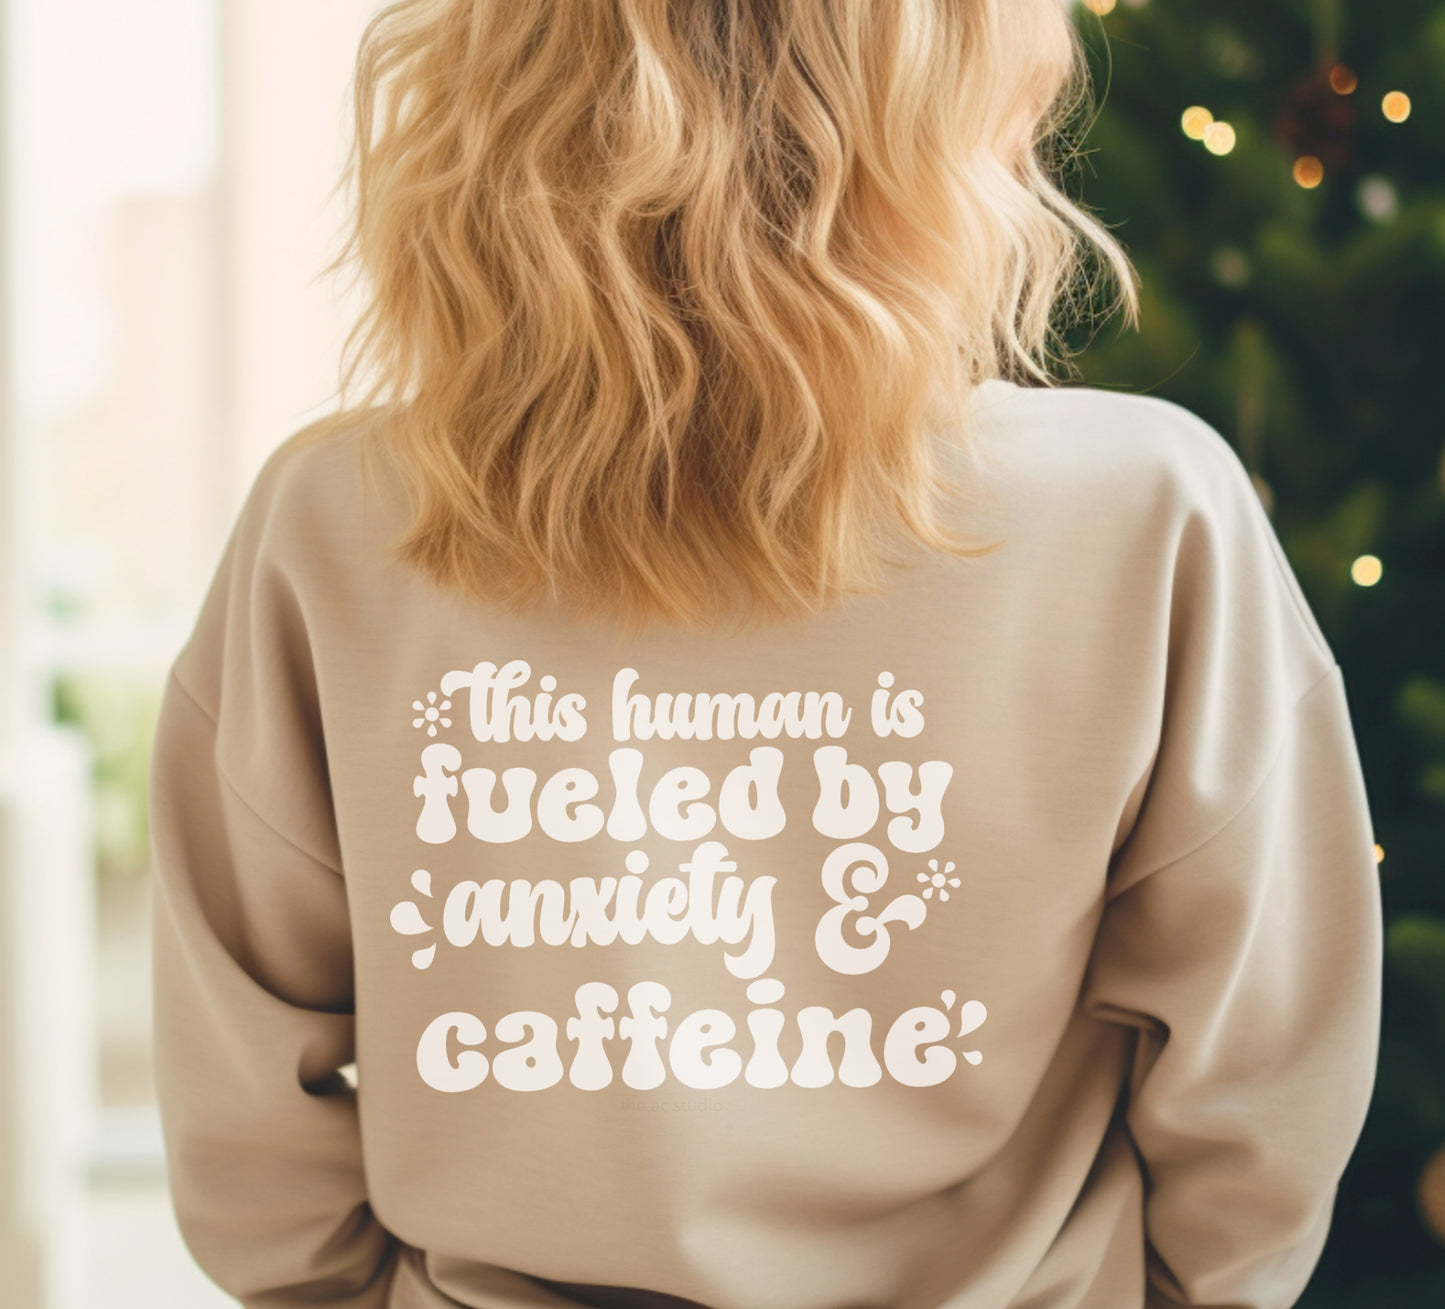 Human Fueled by Anxiety and Caffeine Crewneck Sweater